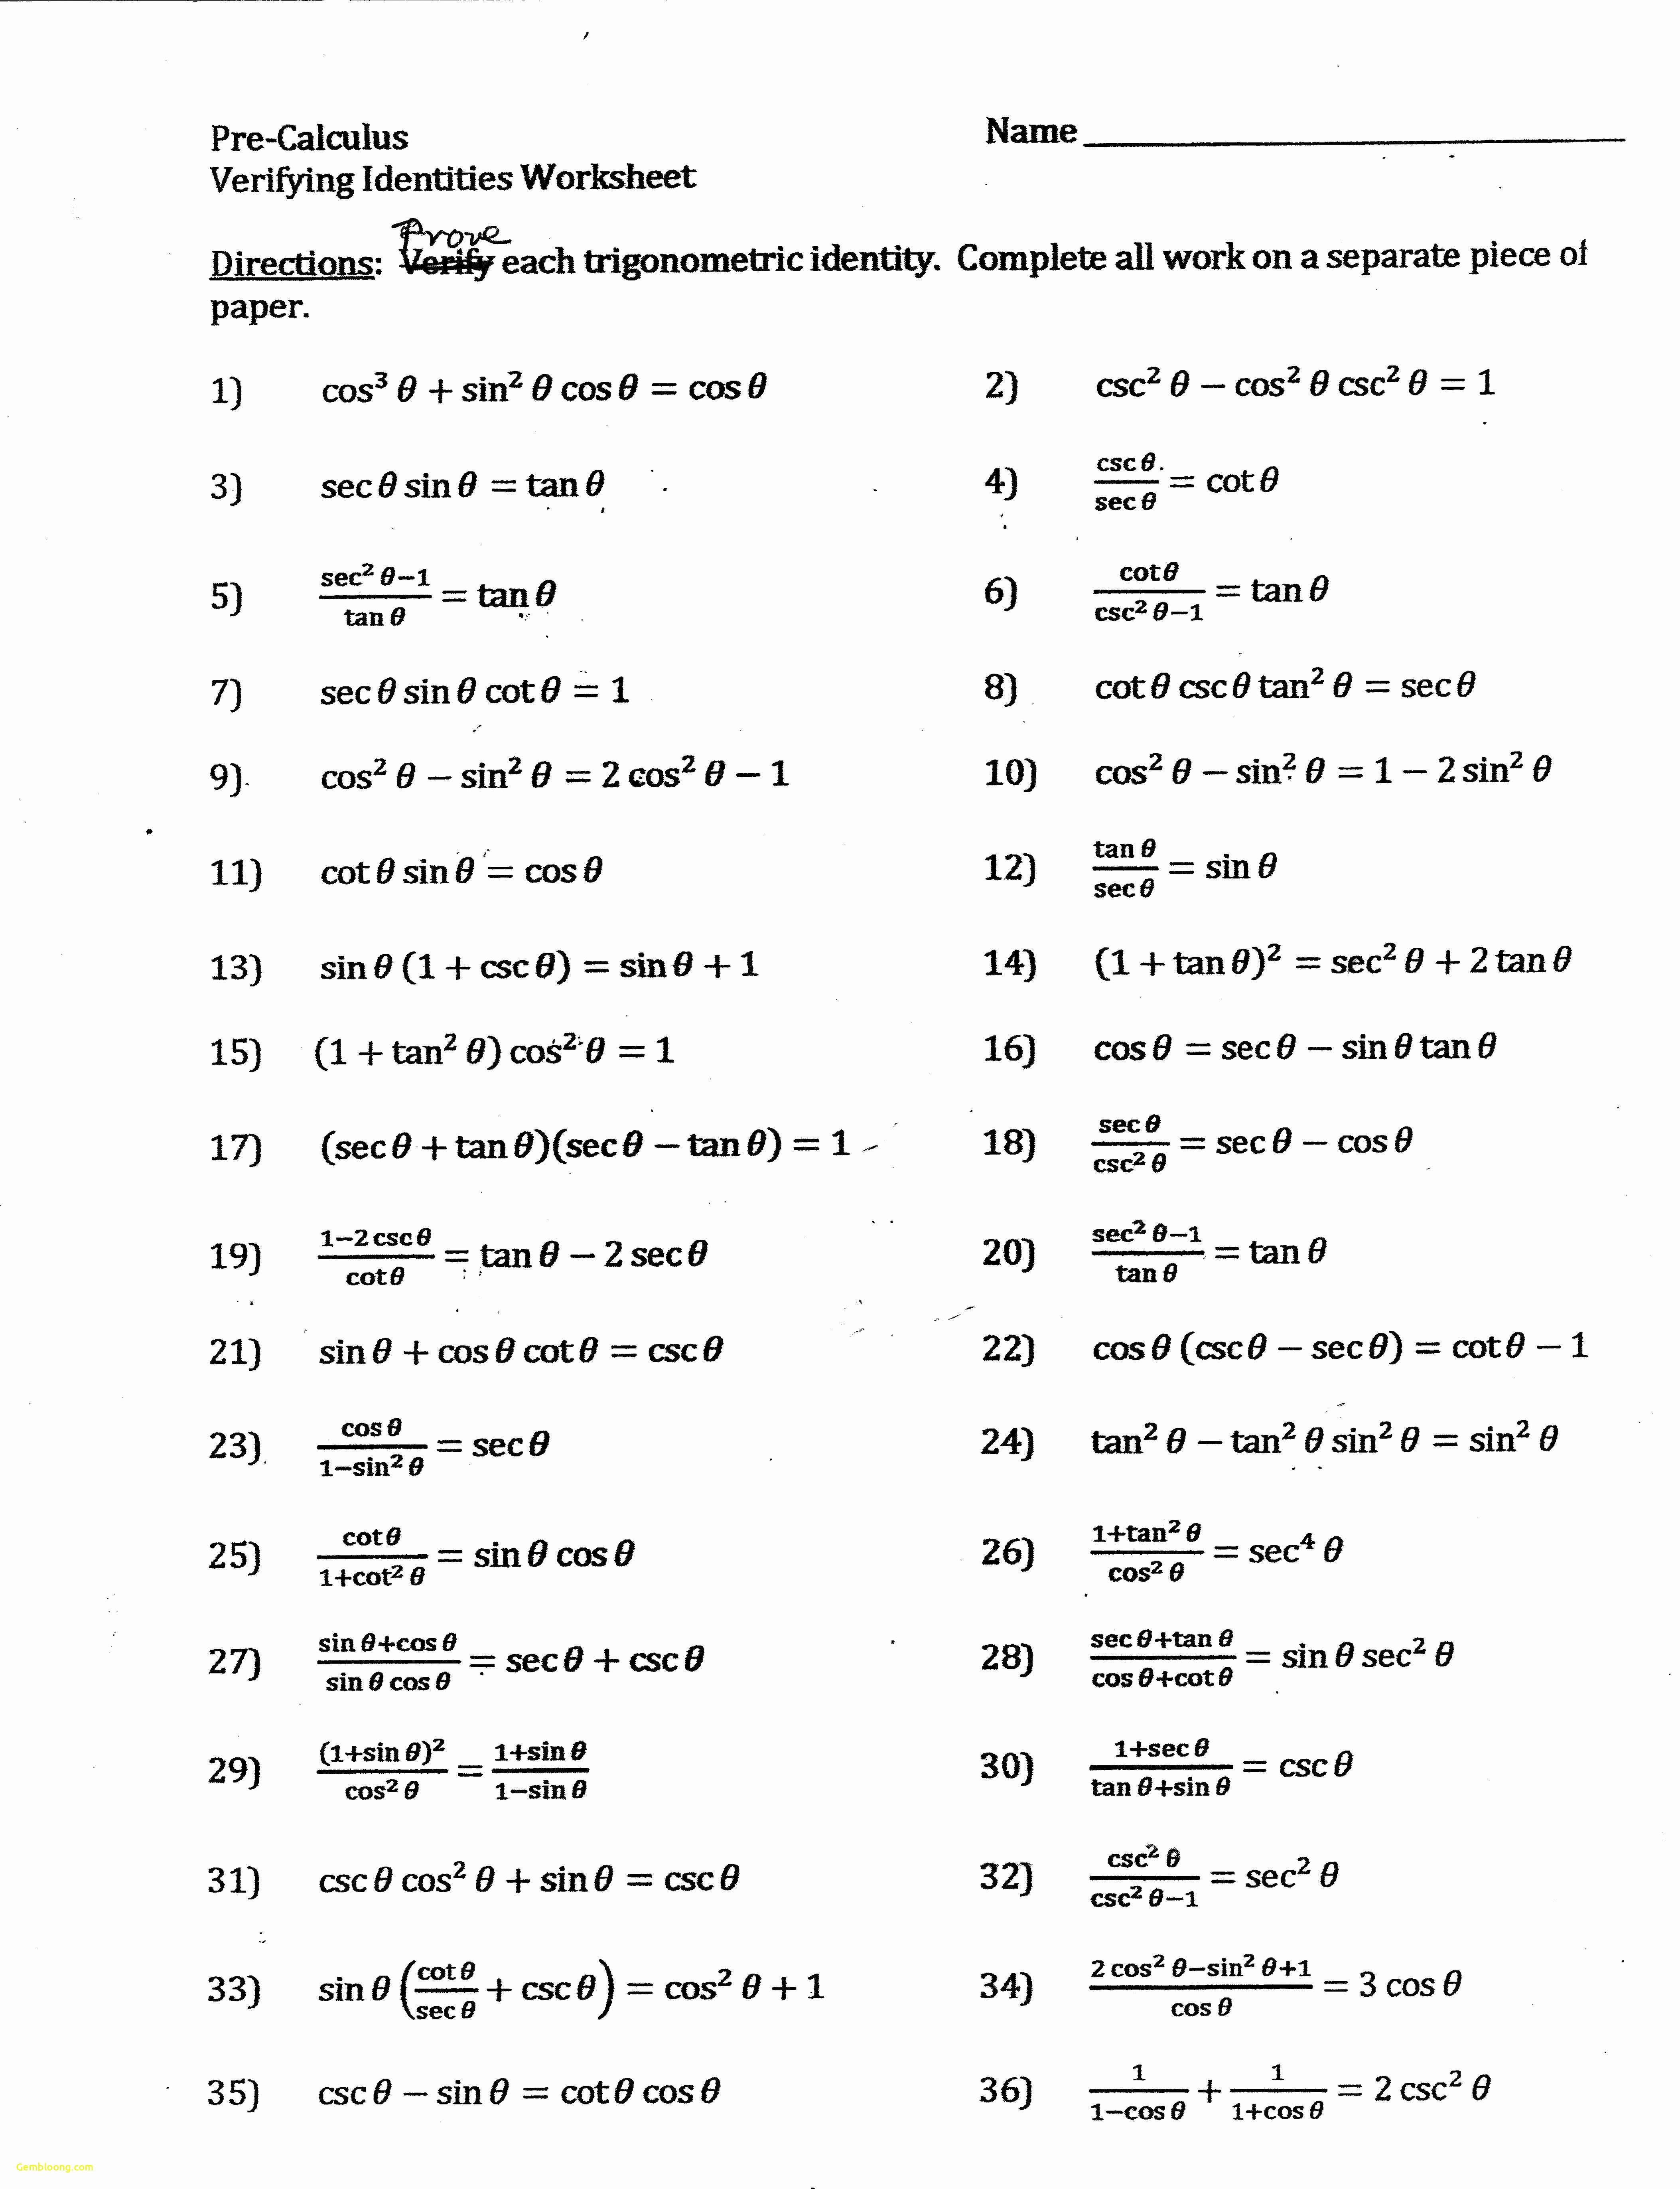 Trig Identities Worksheet with Answers Lovely Proving Trigonometric Identities Worksheet with Answers